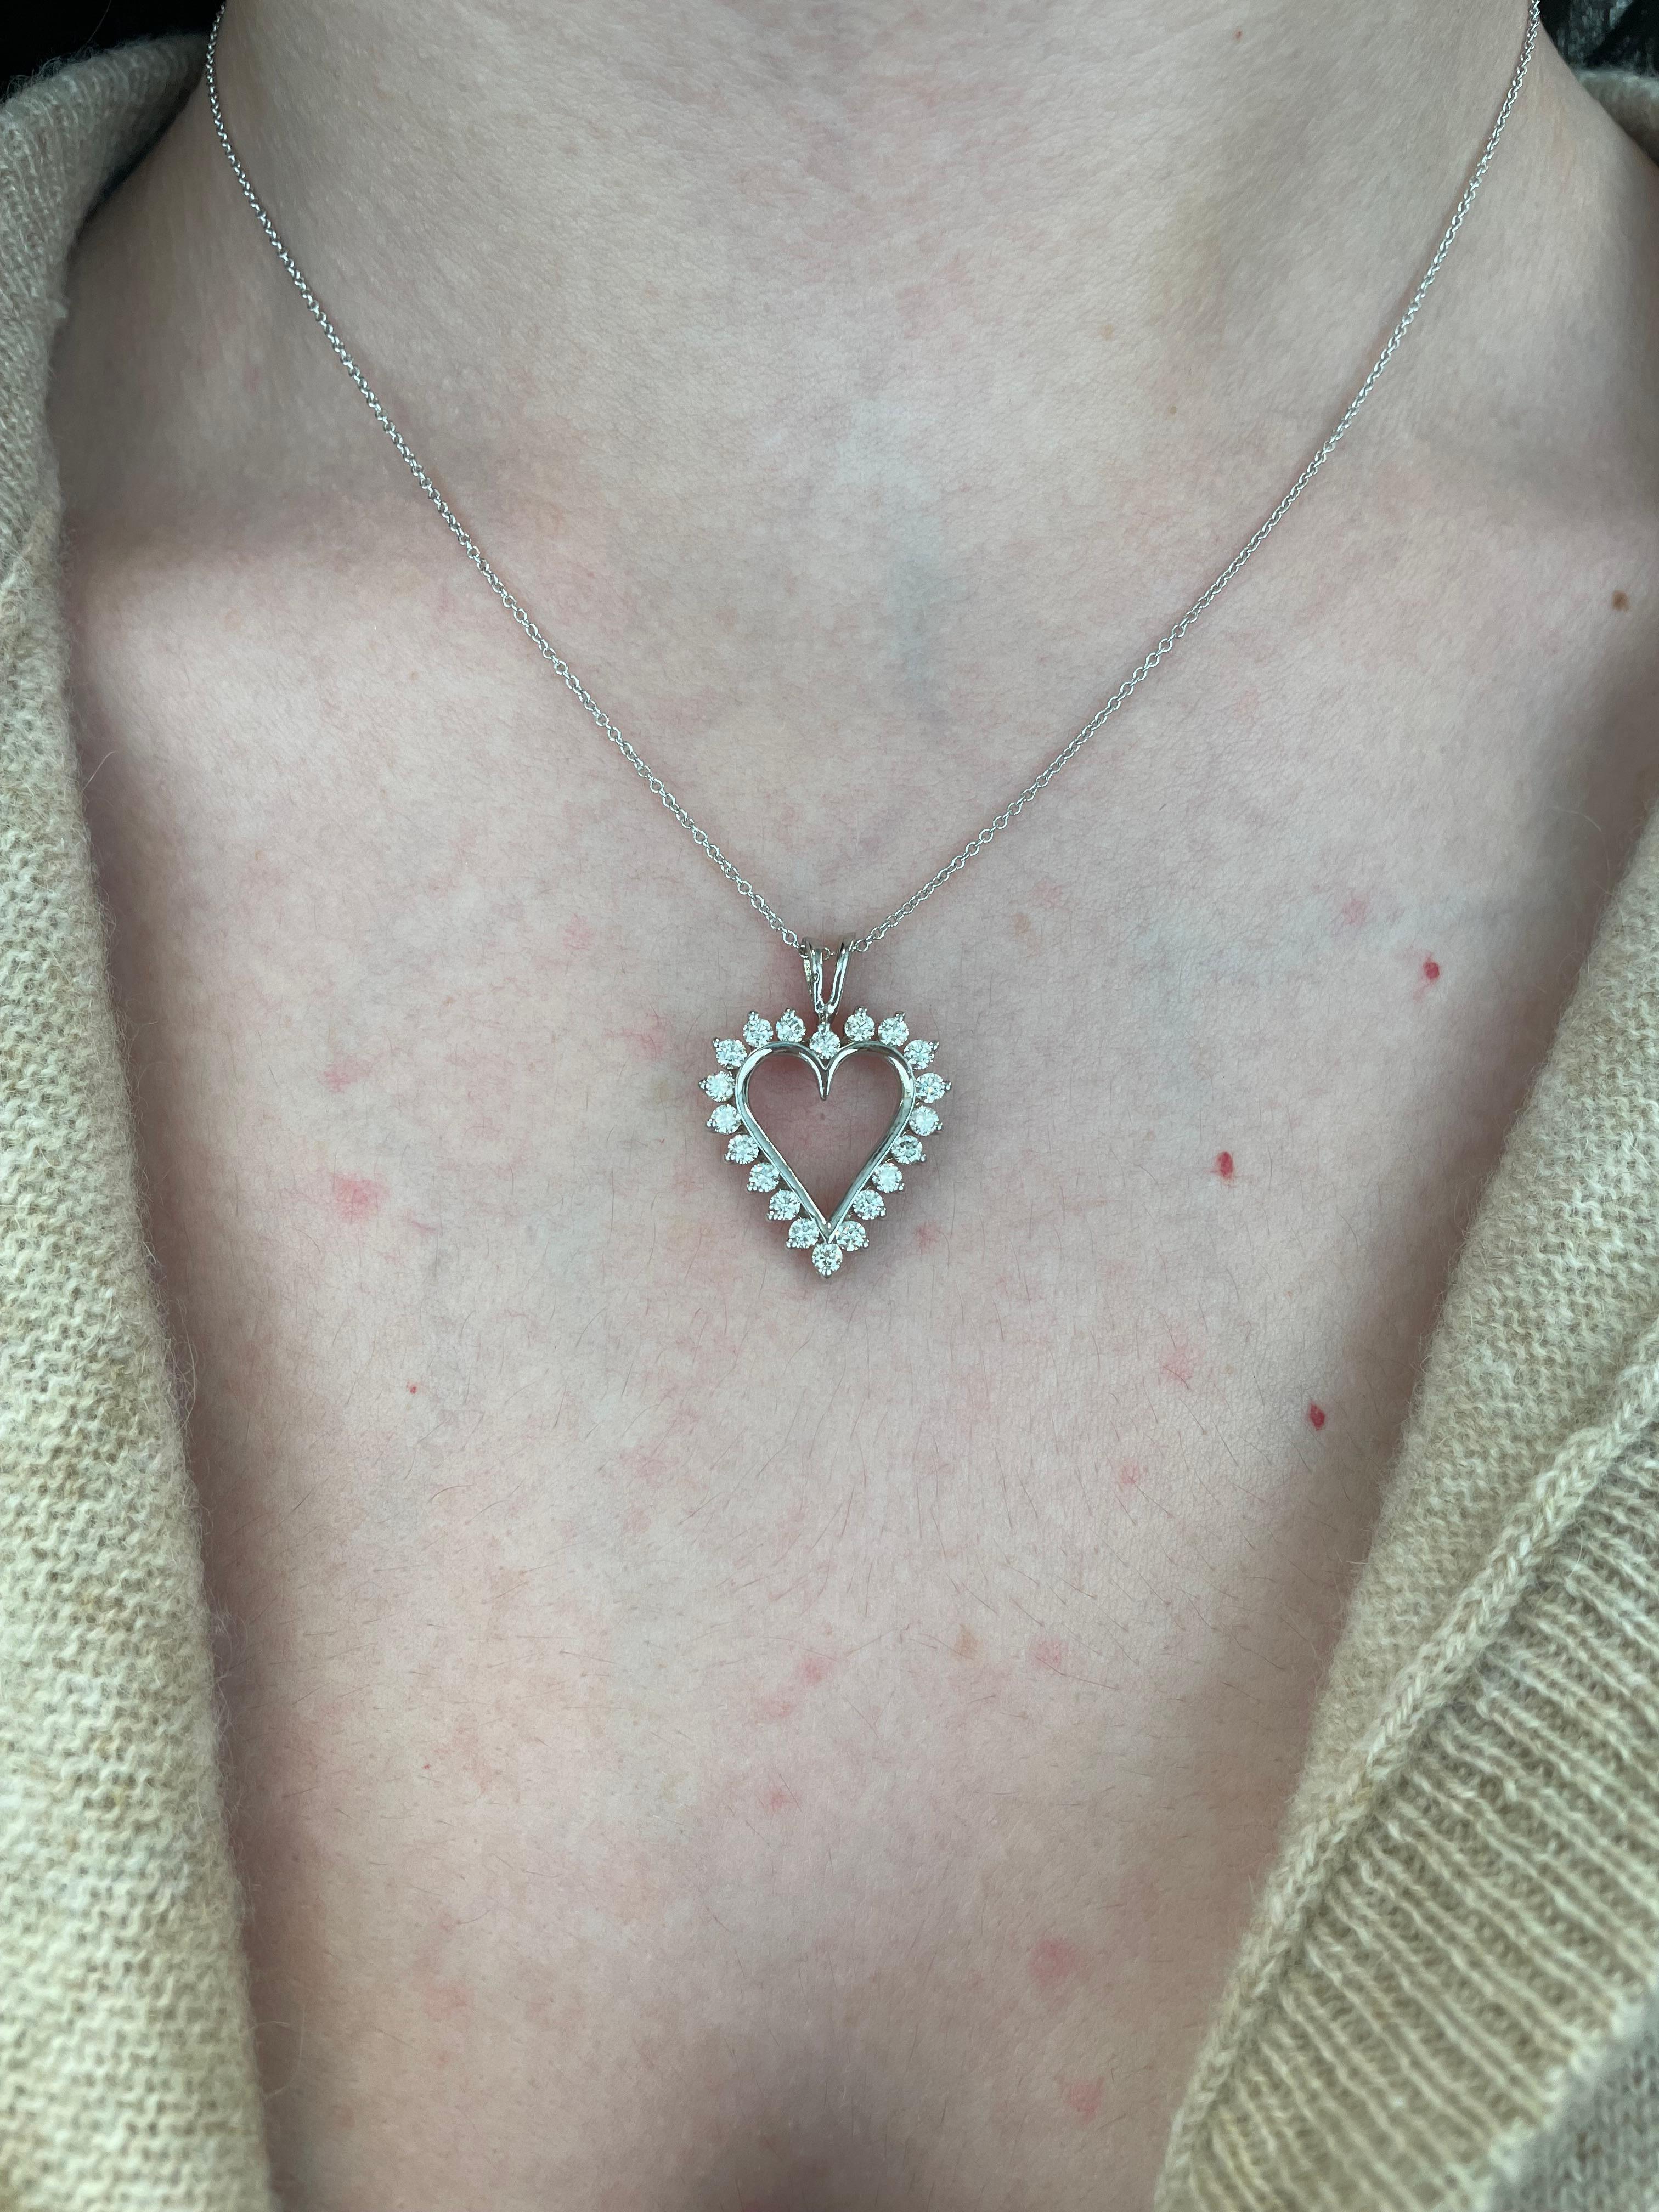 Lovely classic diamond heart pendant necklace.
20 round brilliant diamonds, 0.80 carats. Approximately I/J color and SI clarity. 14-karat white gold, 16 inches.
Accommodated with an up-to-date digital appraisal by a GIA G.G. once purchased, upon